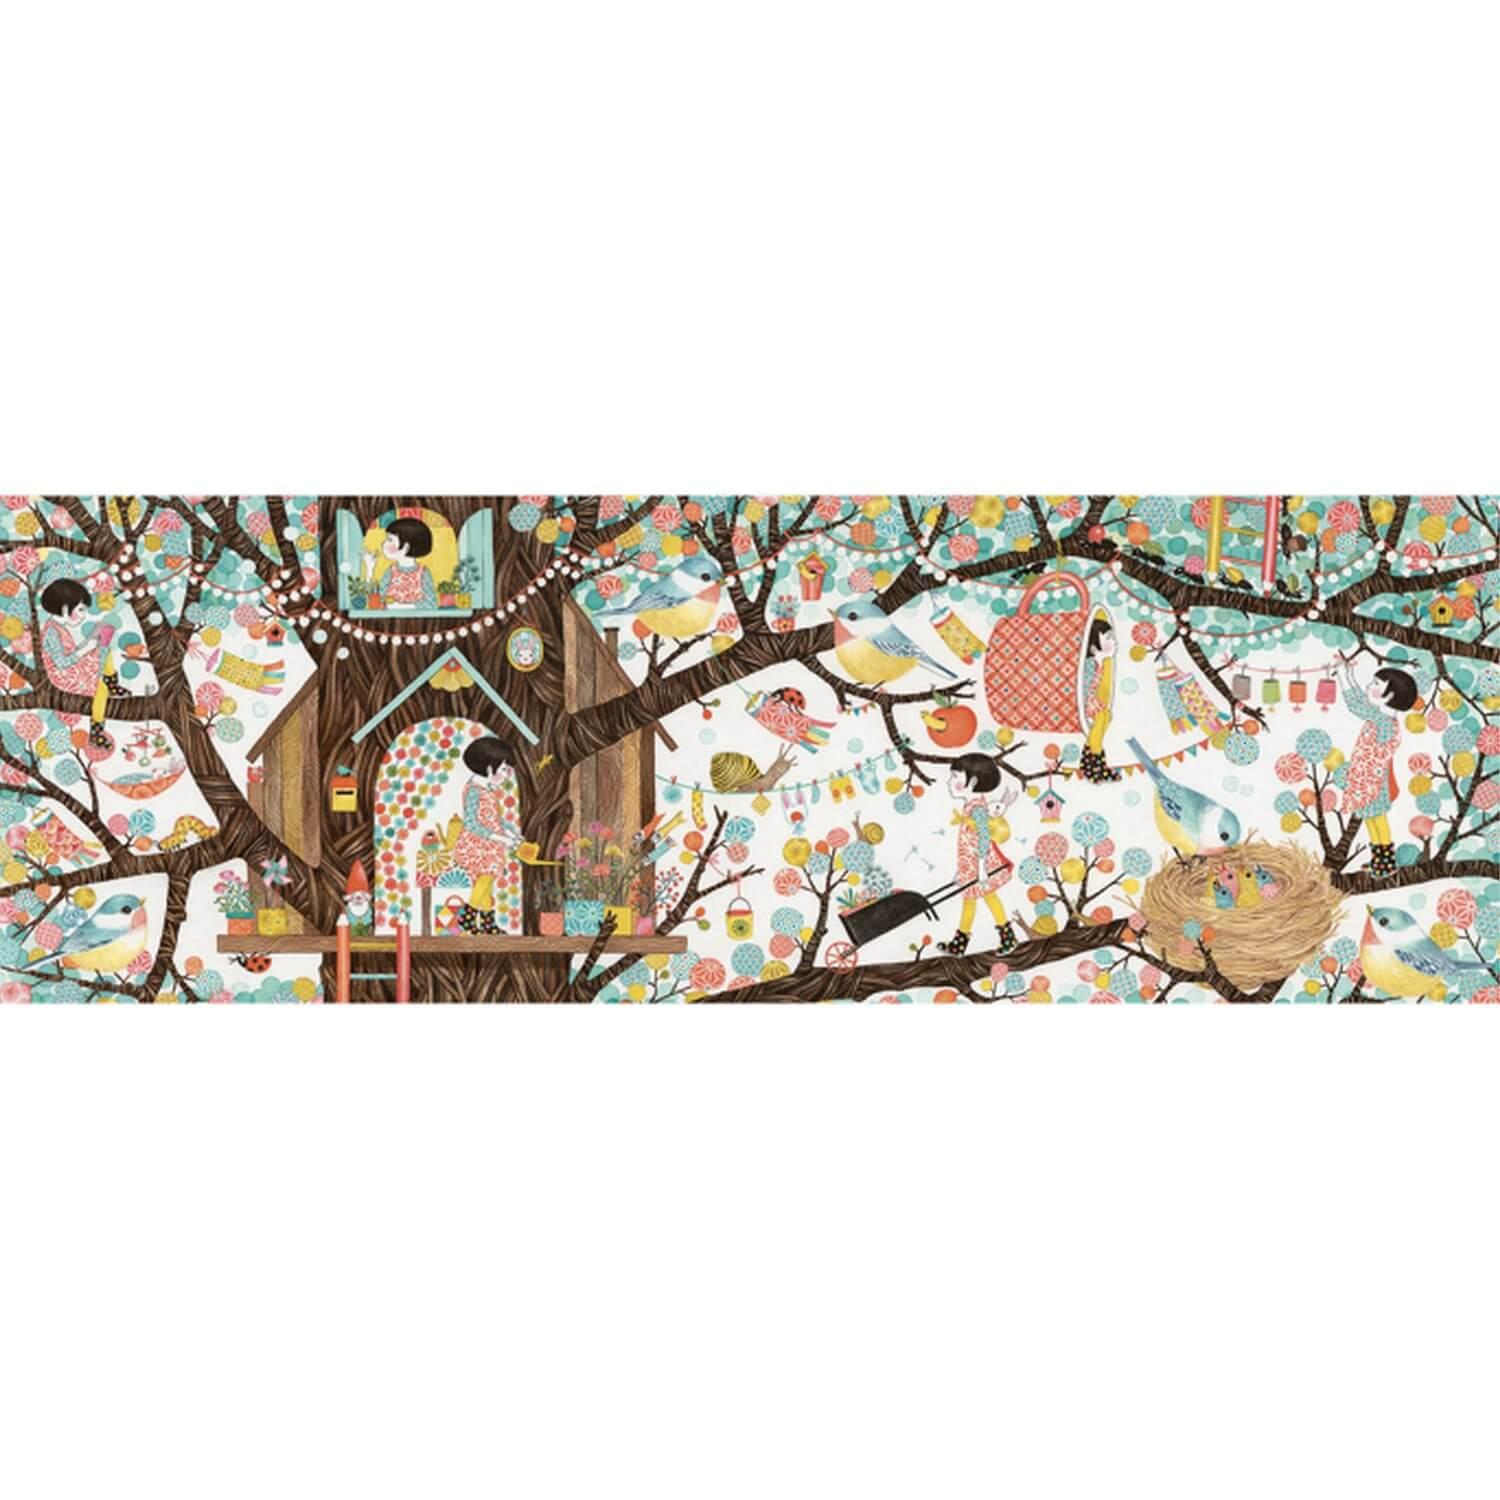 Puzzle 200 pièces : Gallery : Tree house